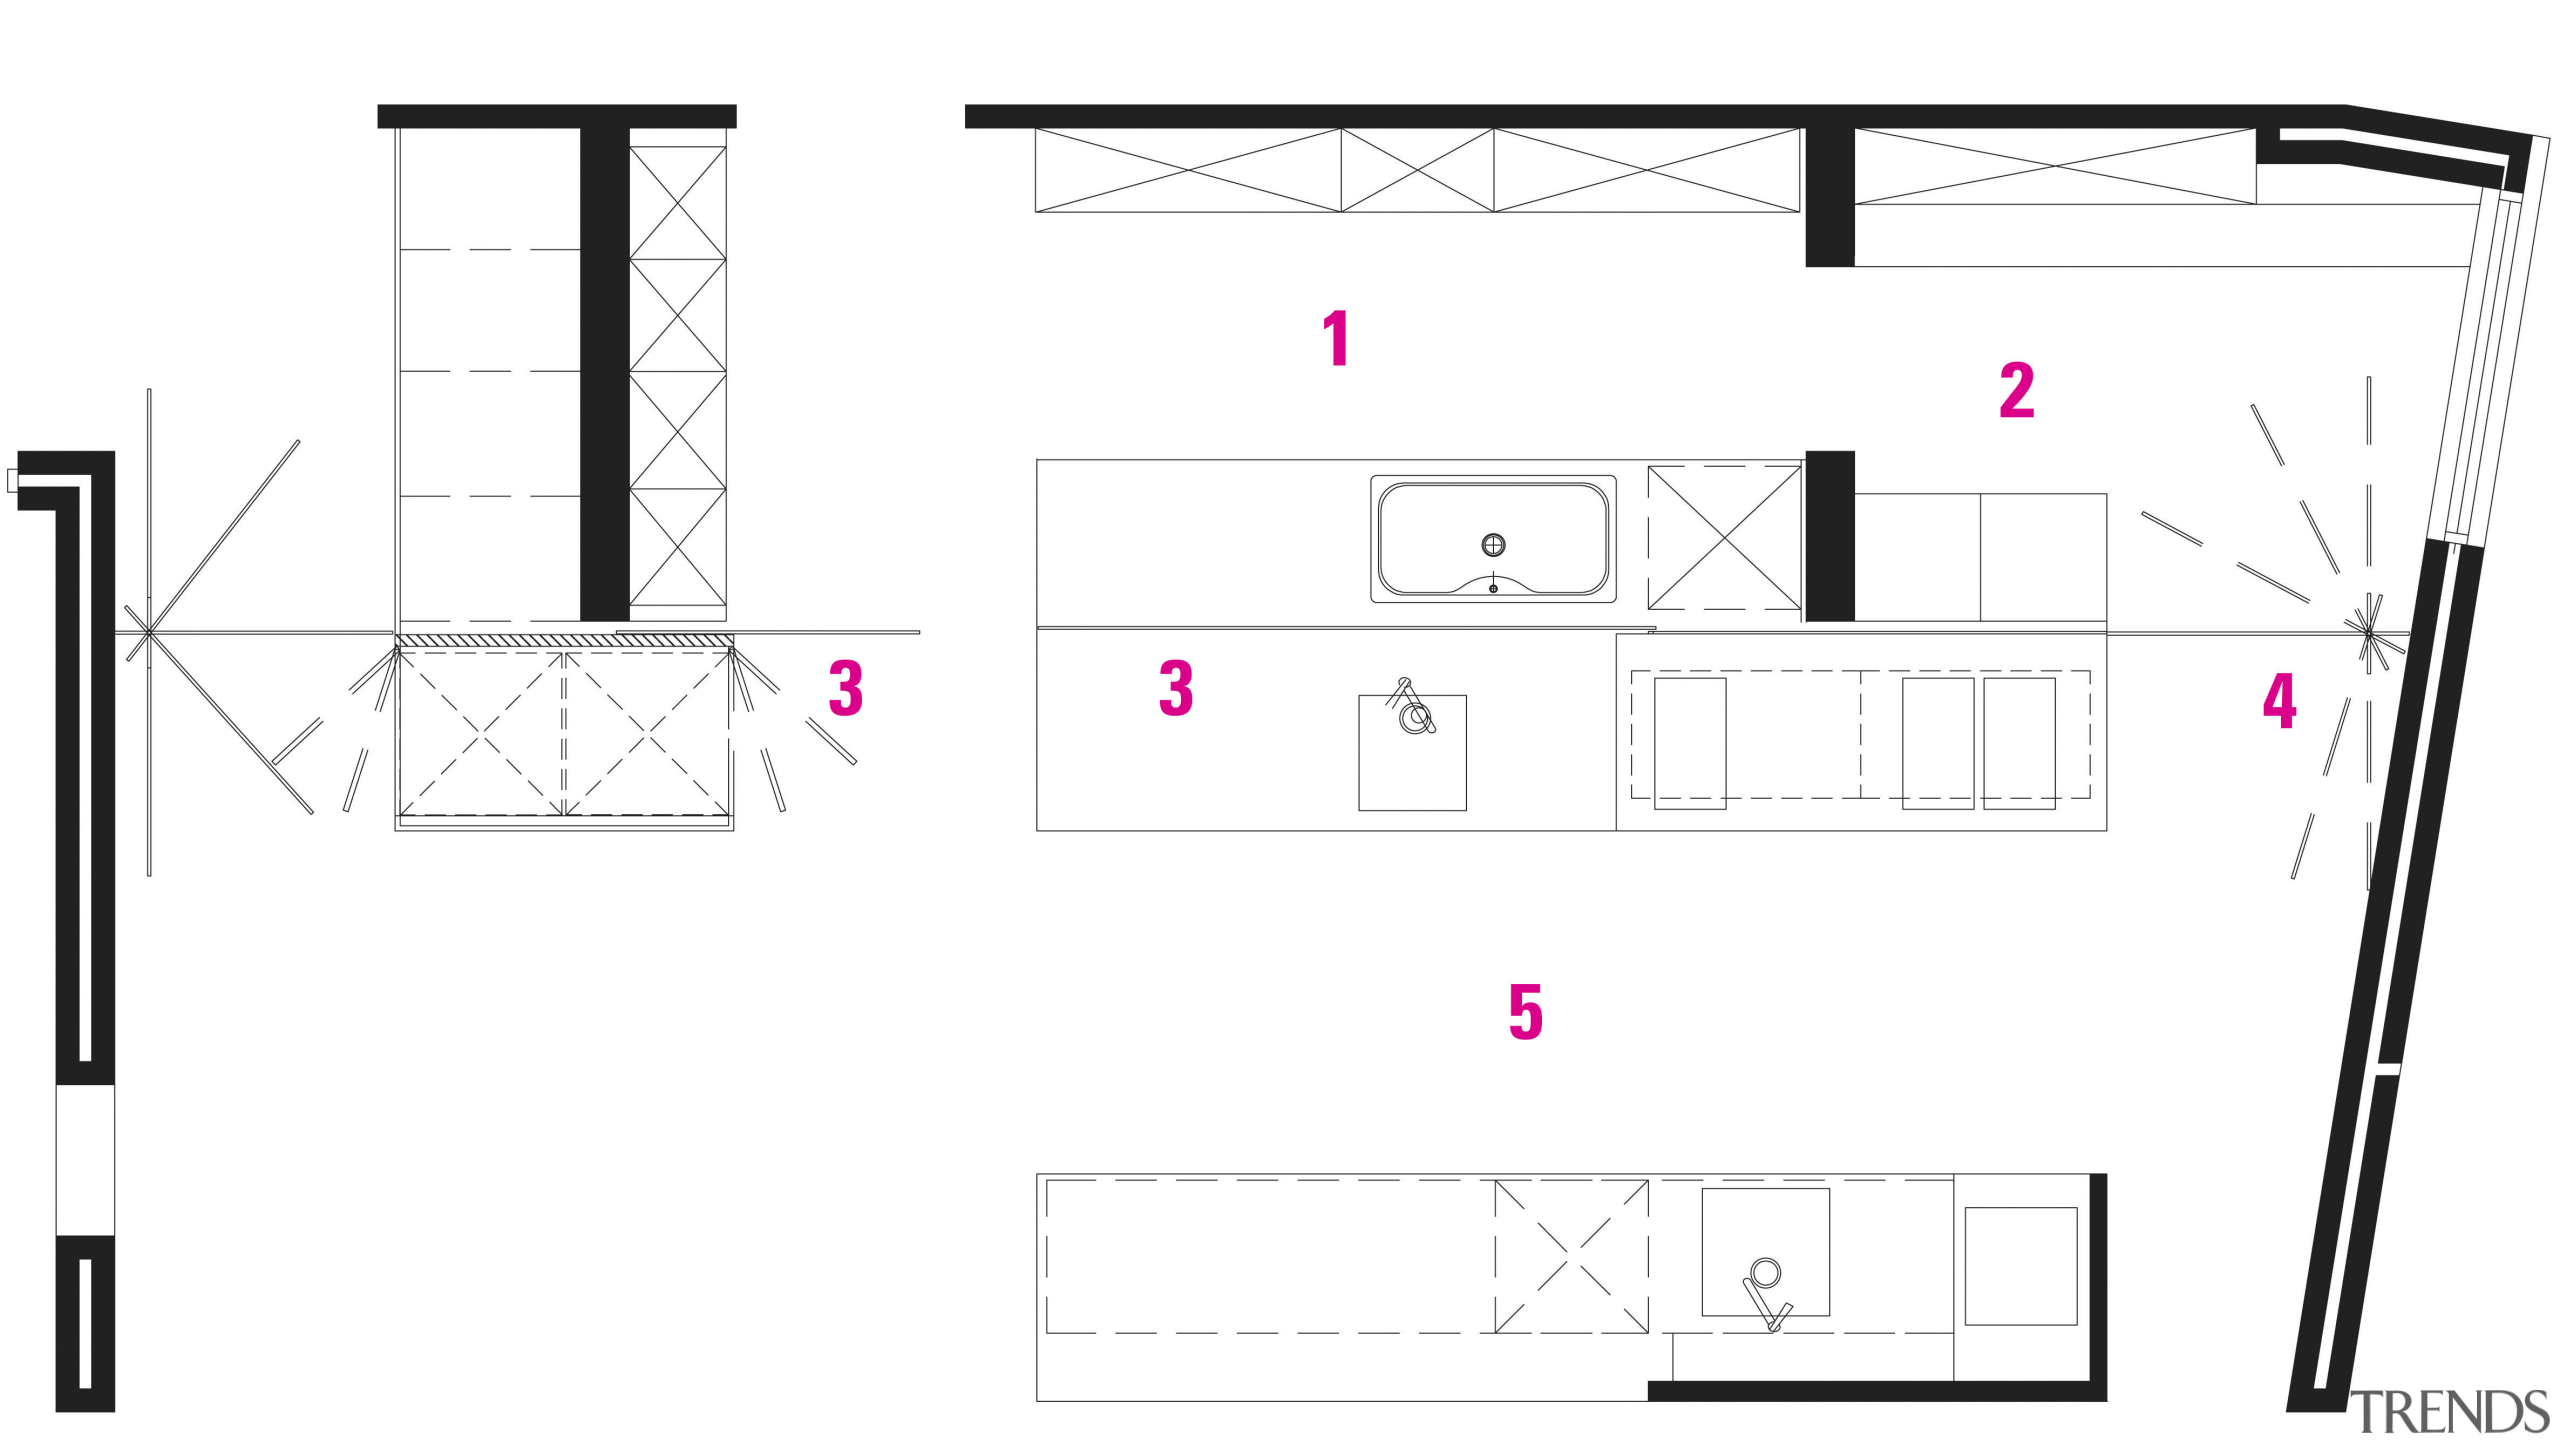 plan view of the kitchen area - plan angle, area, design, diagram, drawing, floor plan, font, line, pattern, product, product design, square, structure, text, white